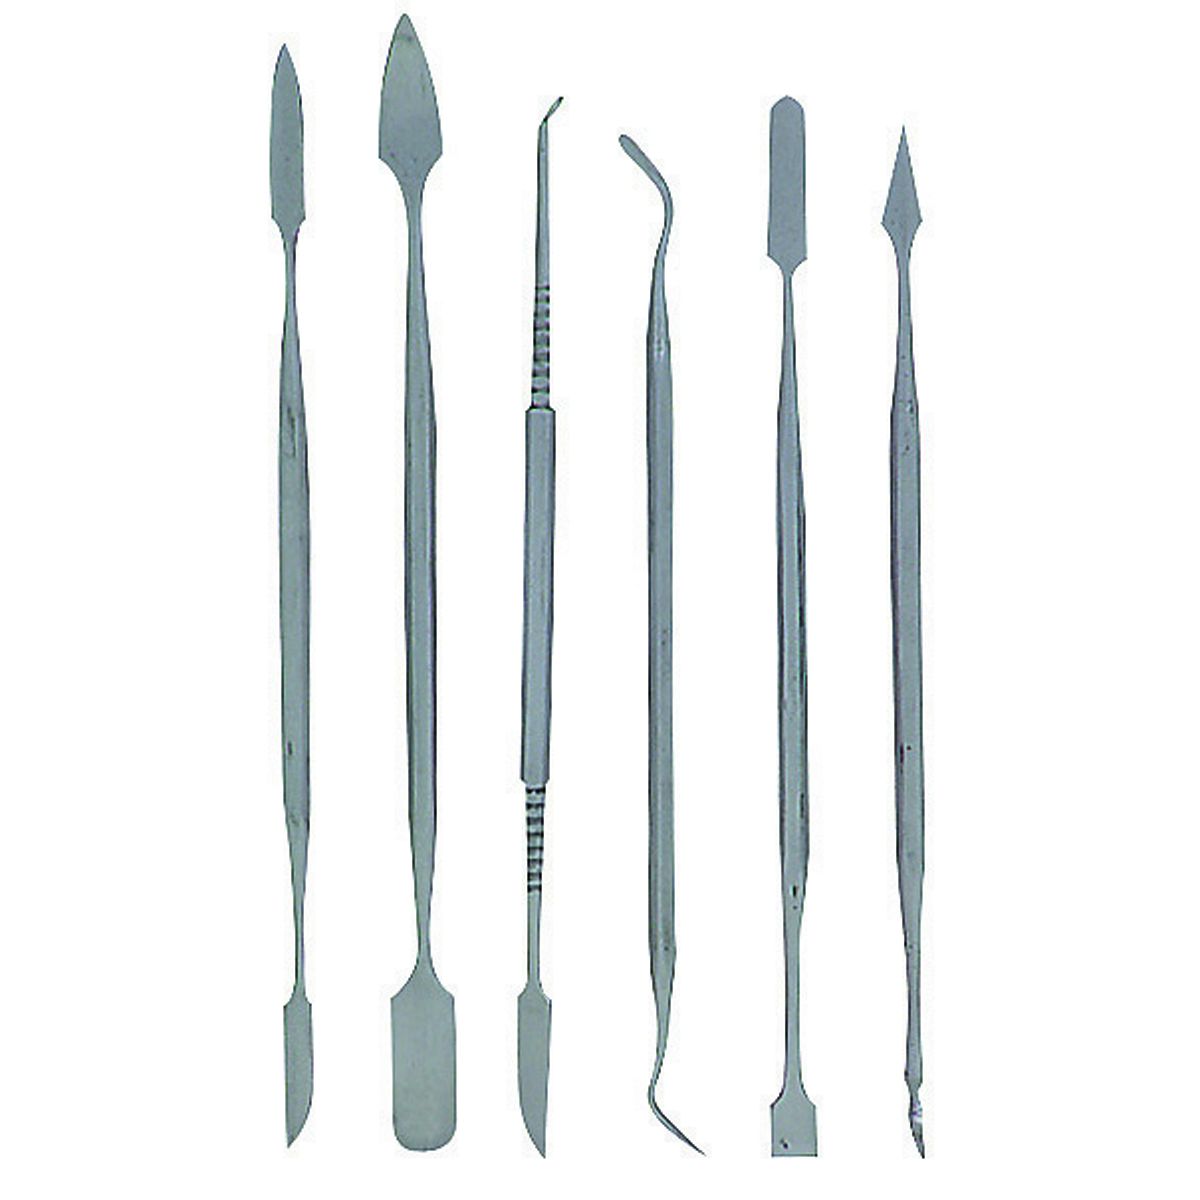 PITTSBURGH 6 Piece Stainless Steel Carving Set